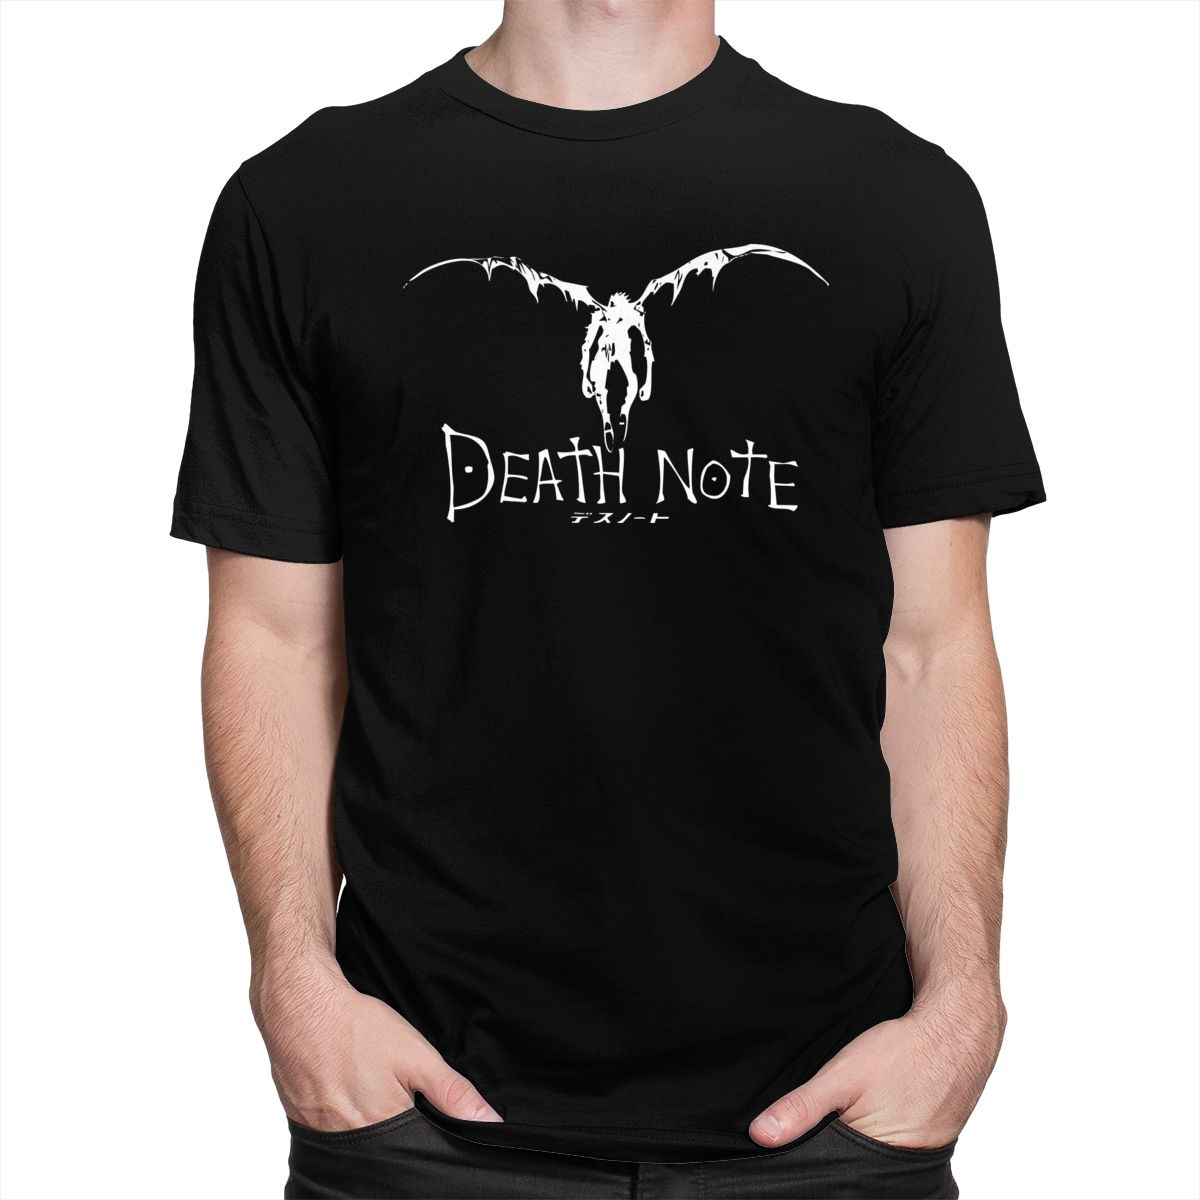 Death Note – Printed T-Shirt (+10 Colors) T-Shirts & Tank Tops